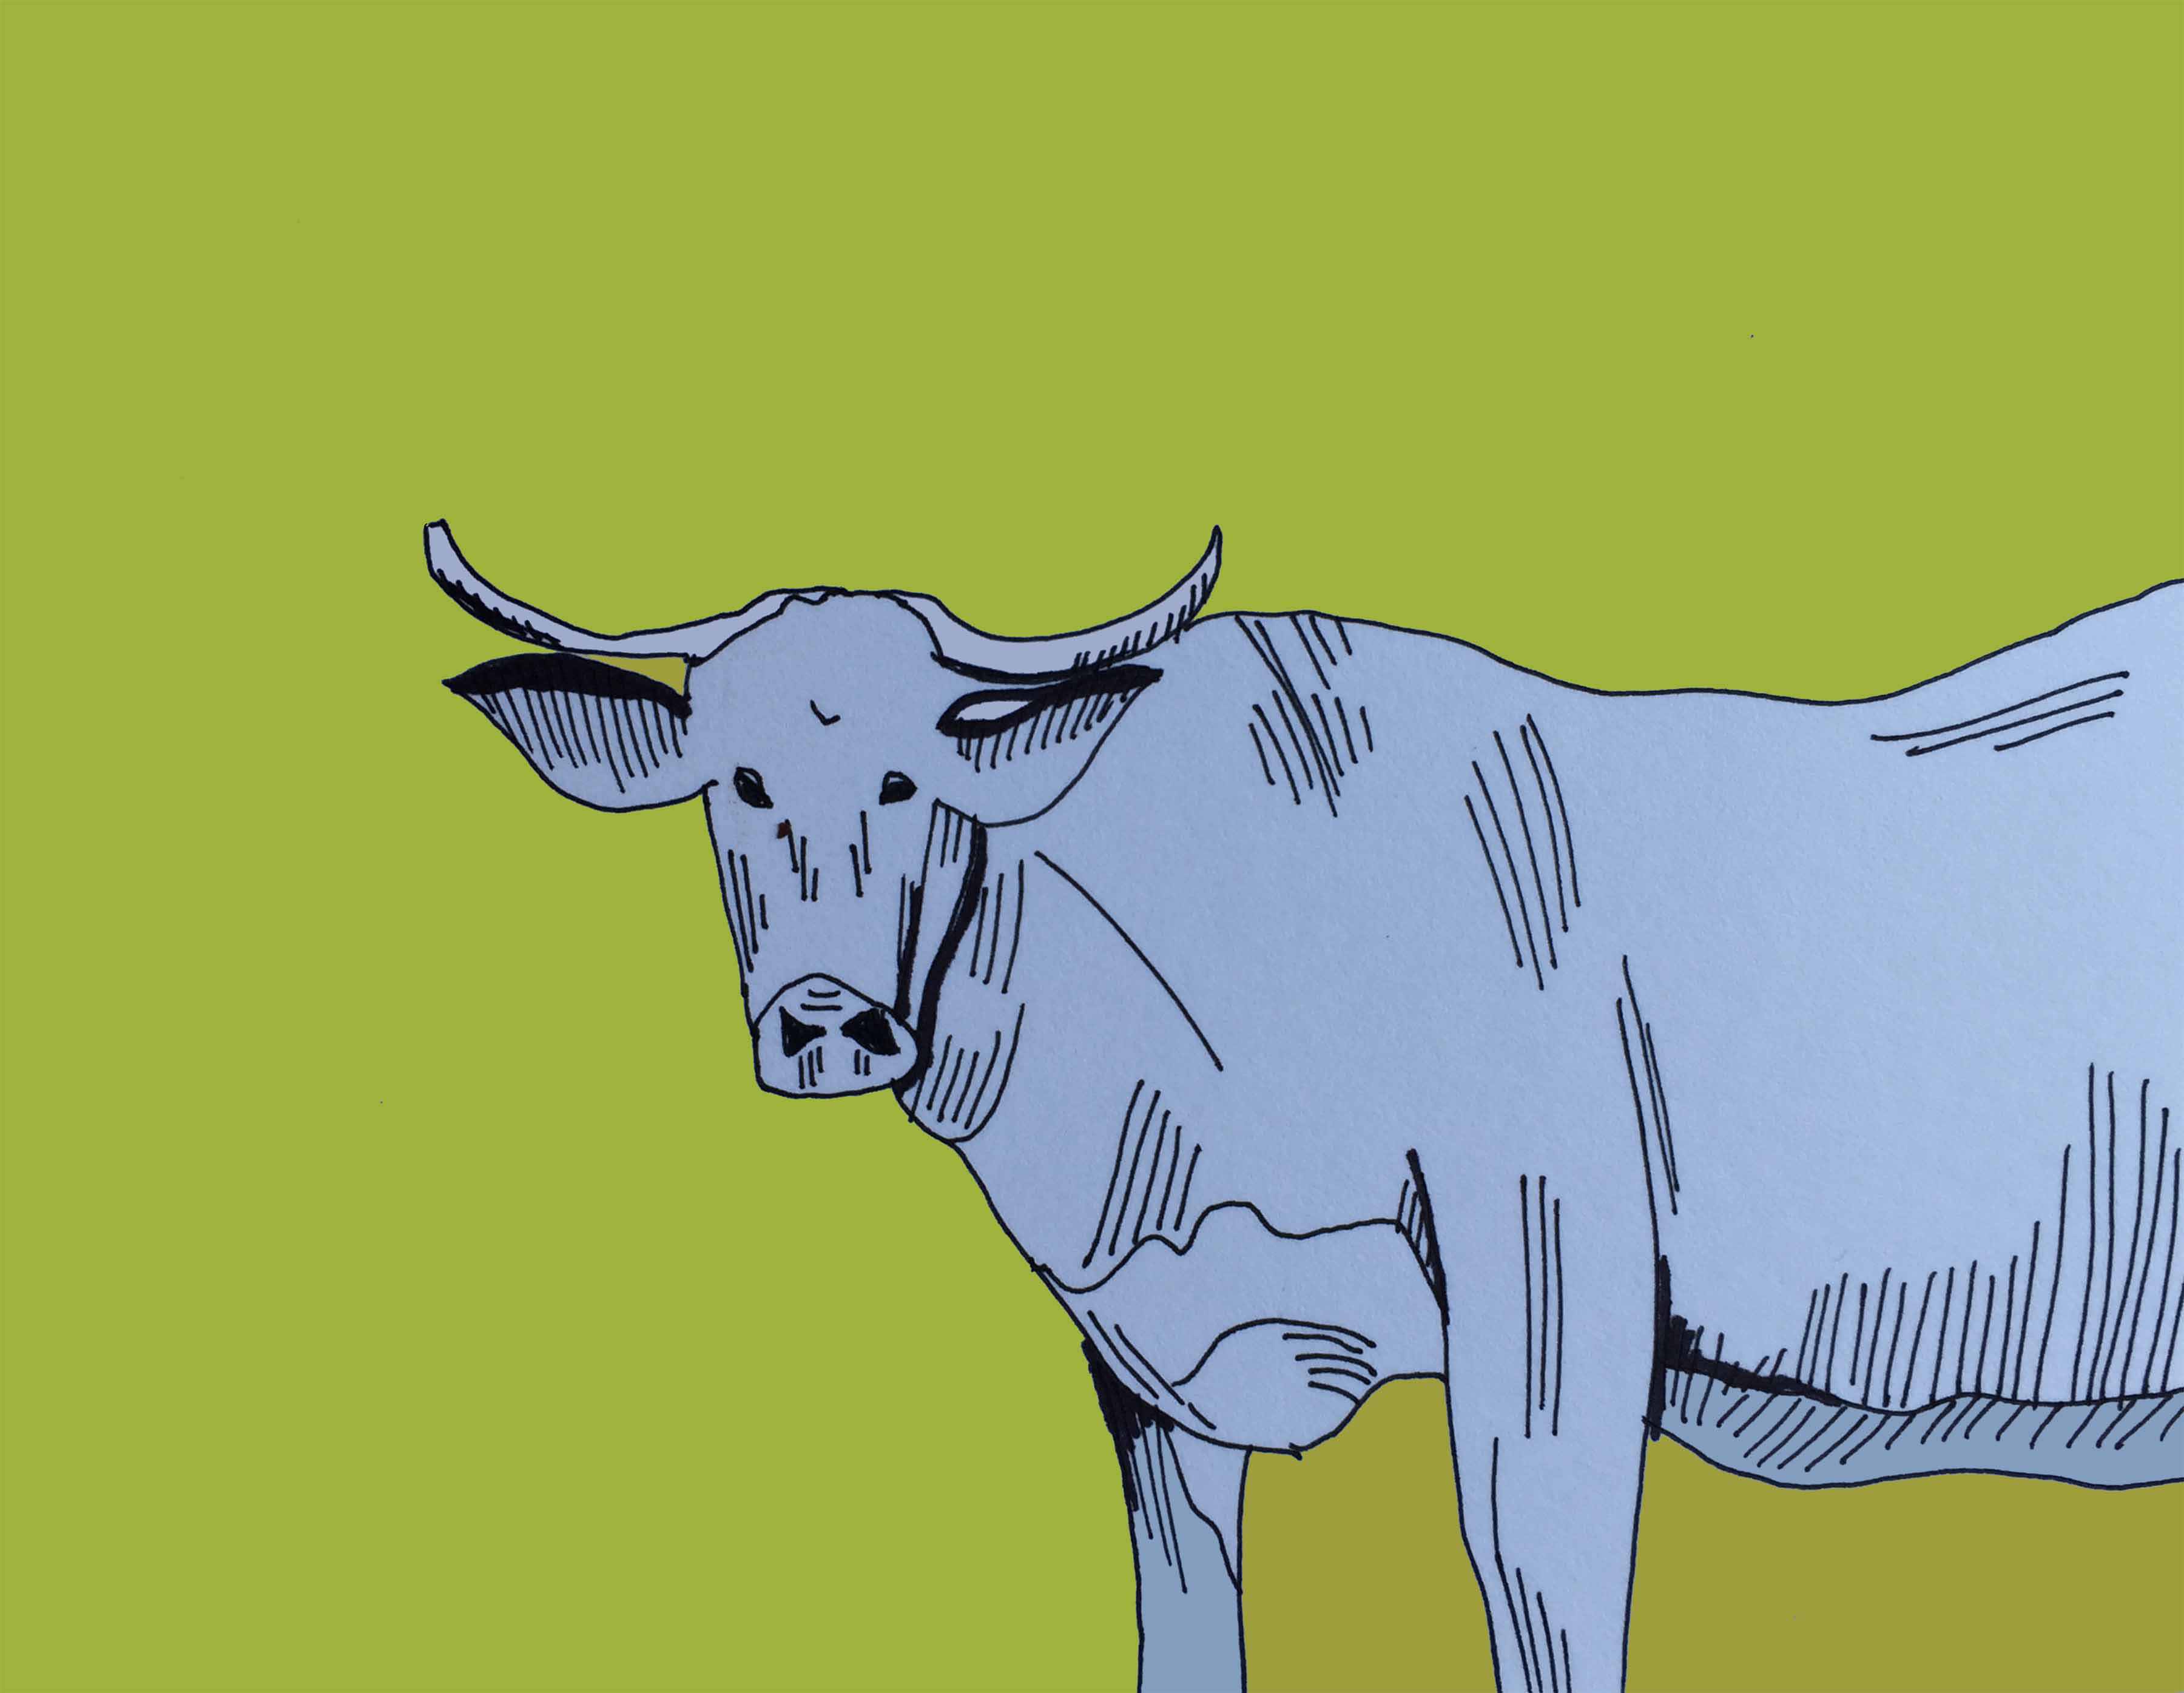 art every day number 167 / illustration / drawing / cow portrait one